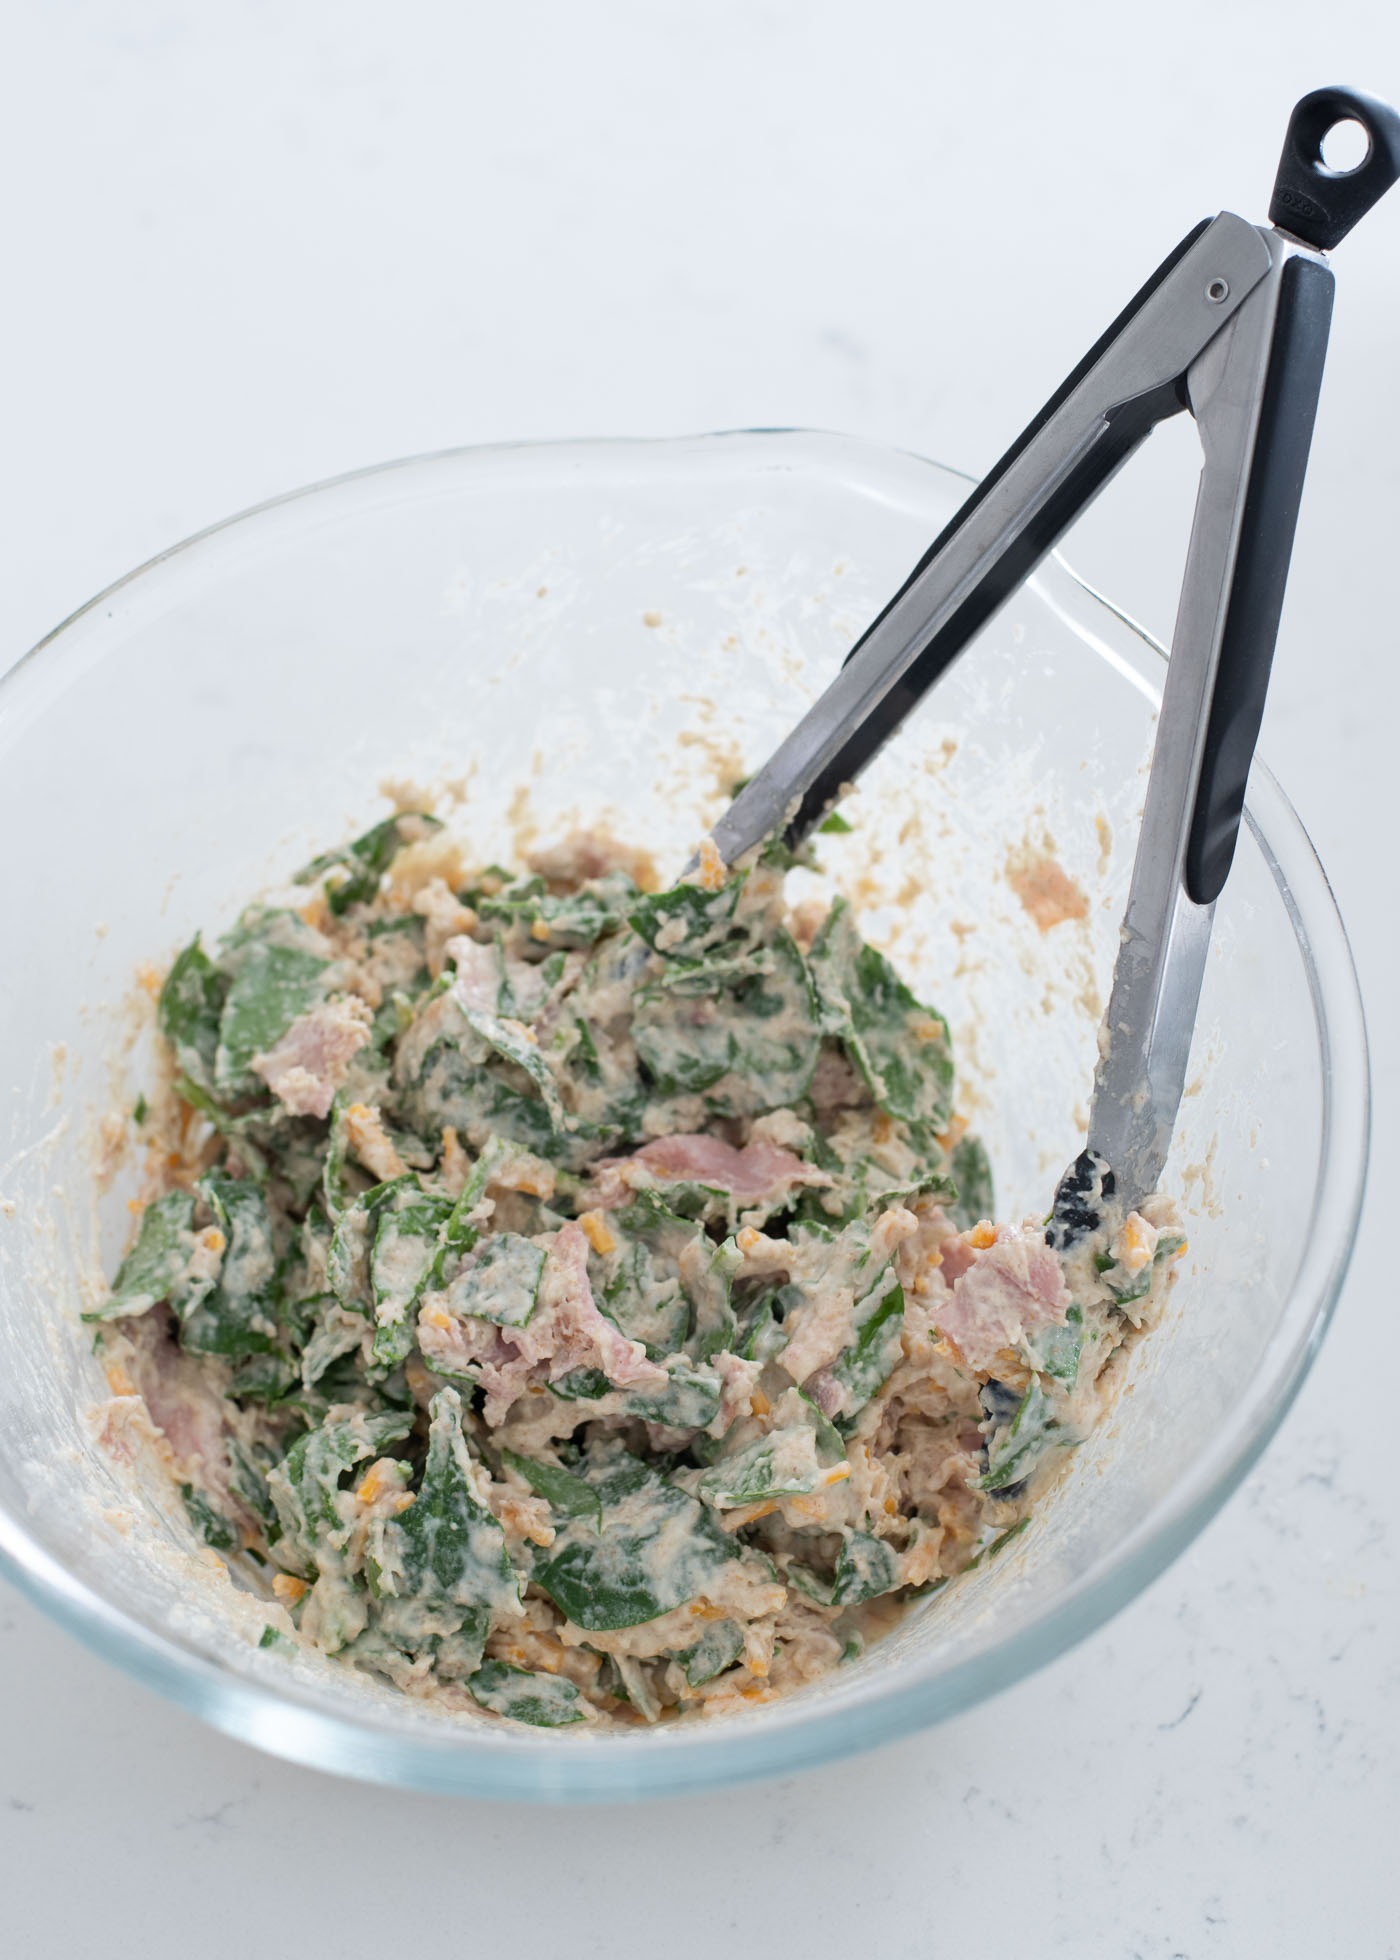 Tossing savory waffle batter with spinach, ham, and cheese with kitchen tongs